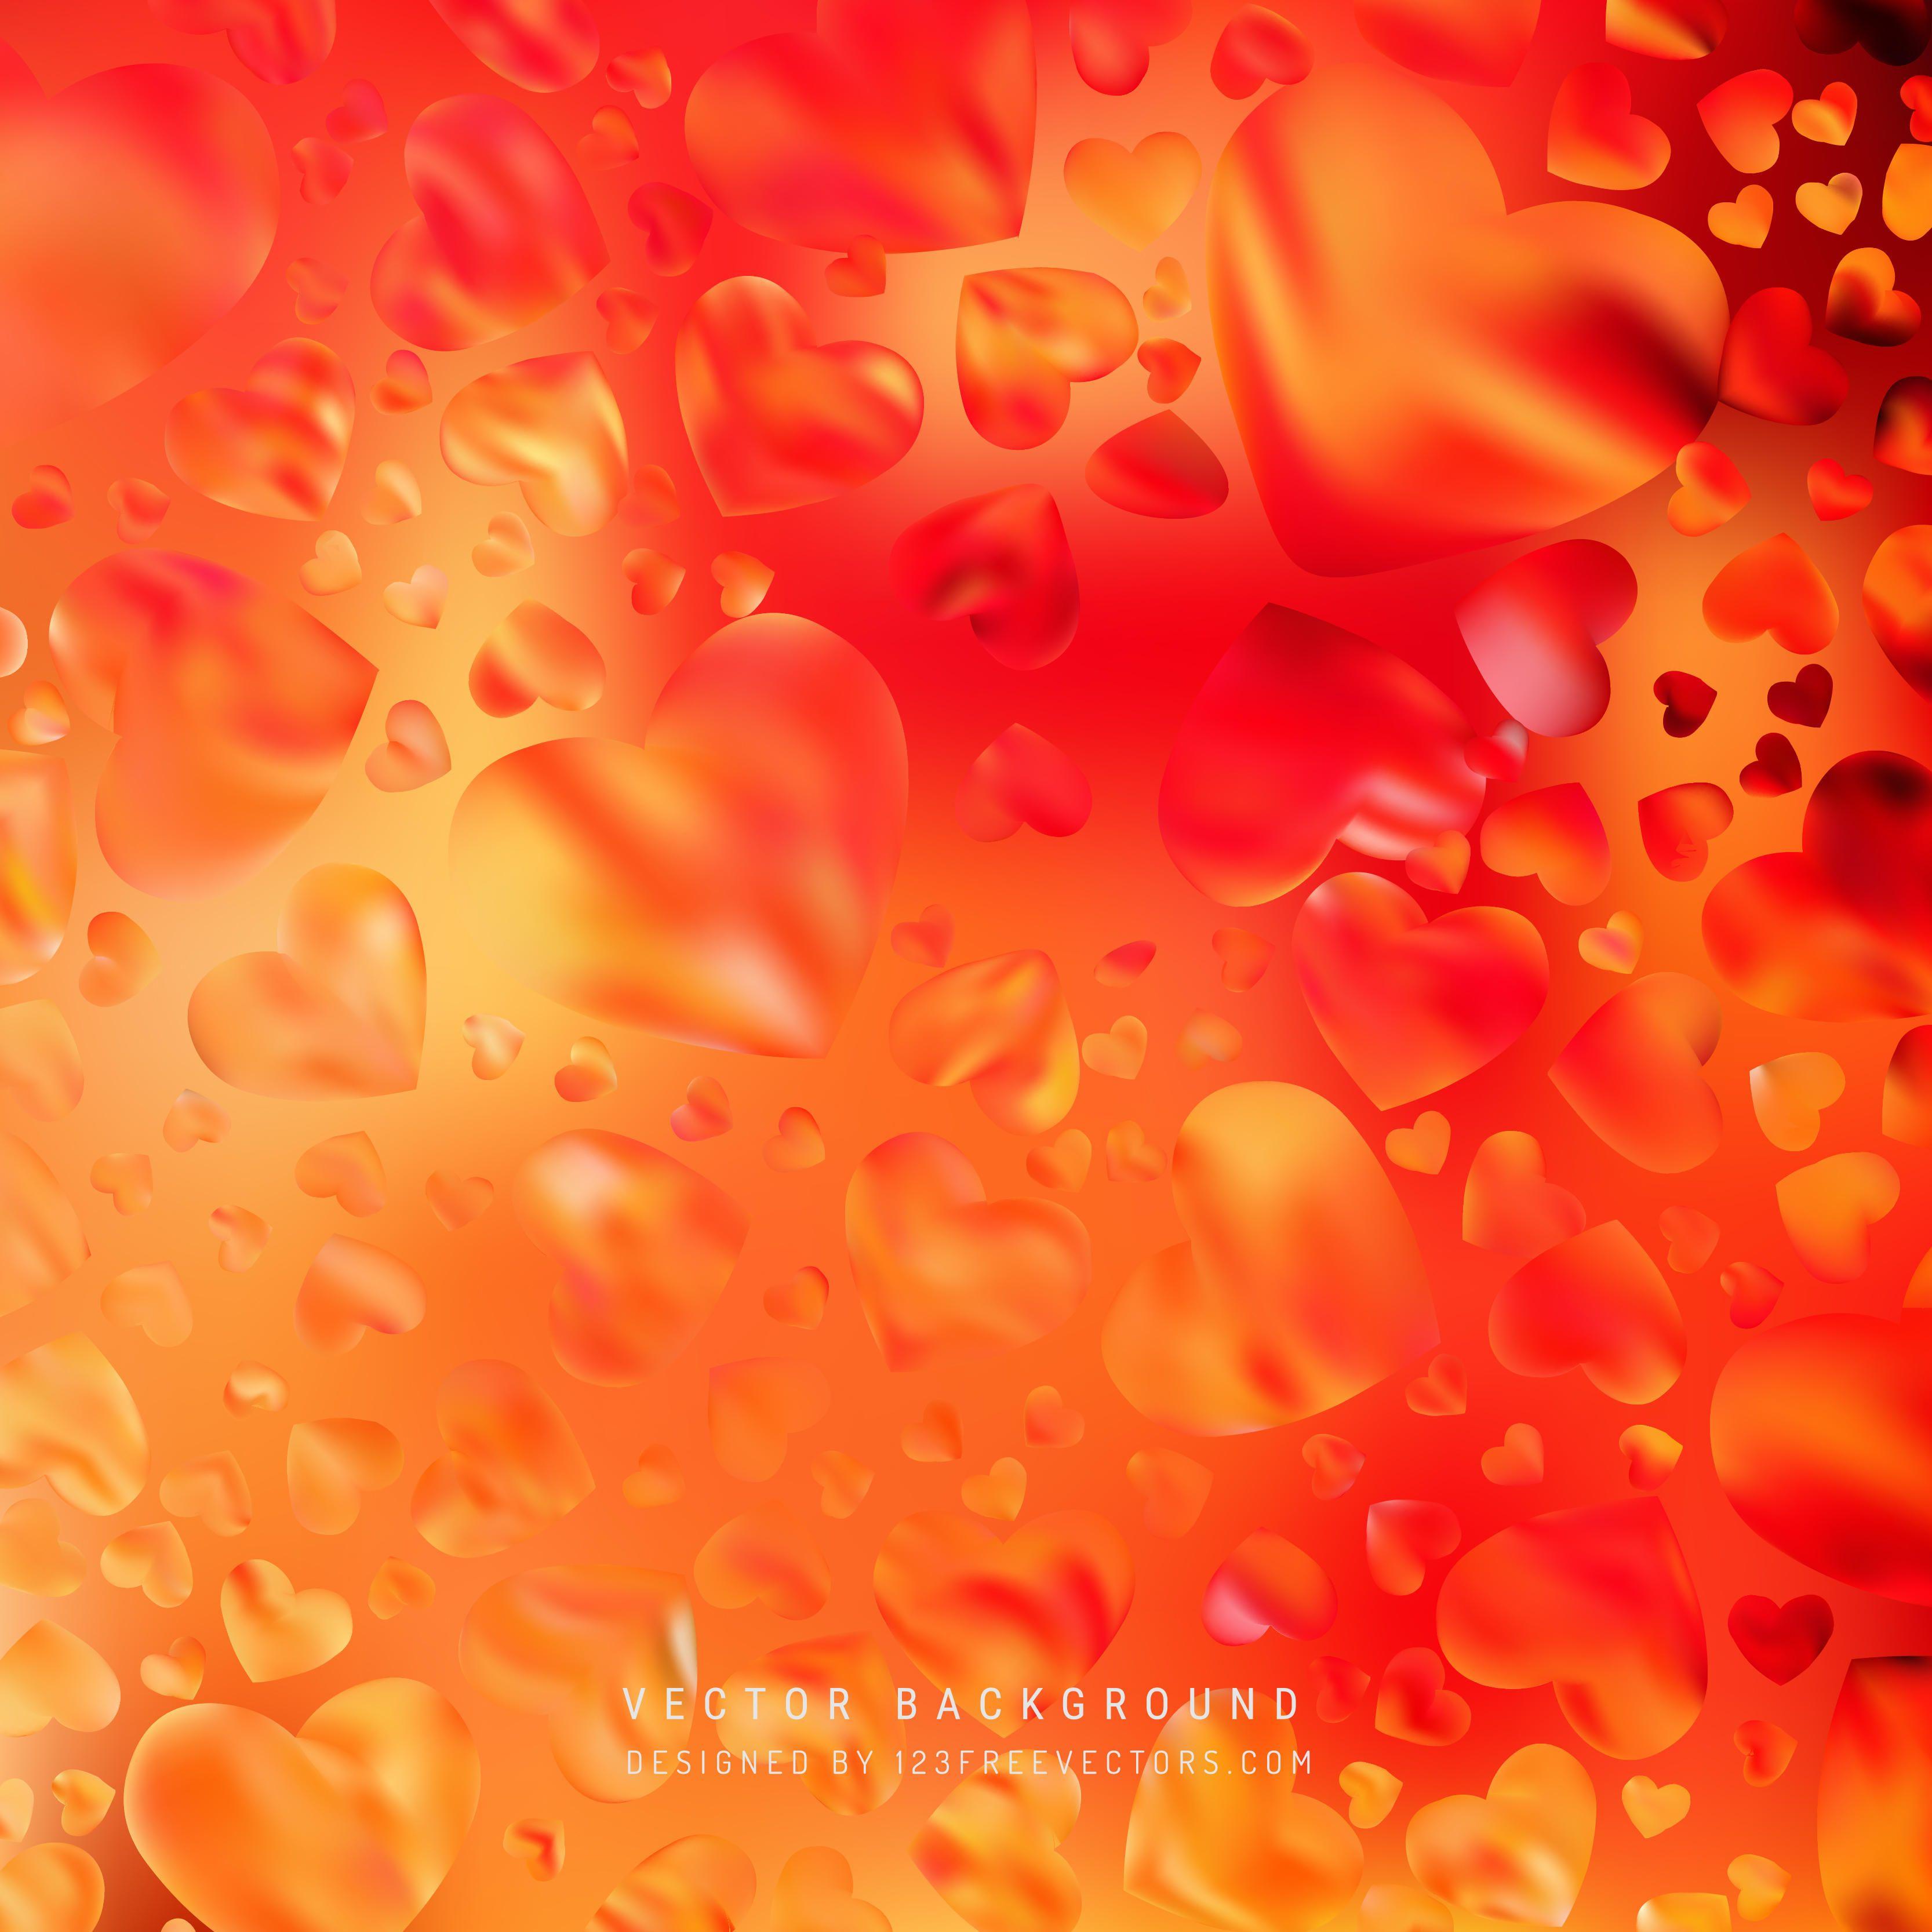 Abstract Cool Orange Valentine Heart BackgroundFreevectors